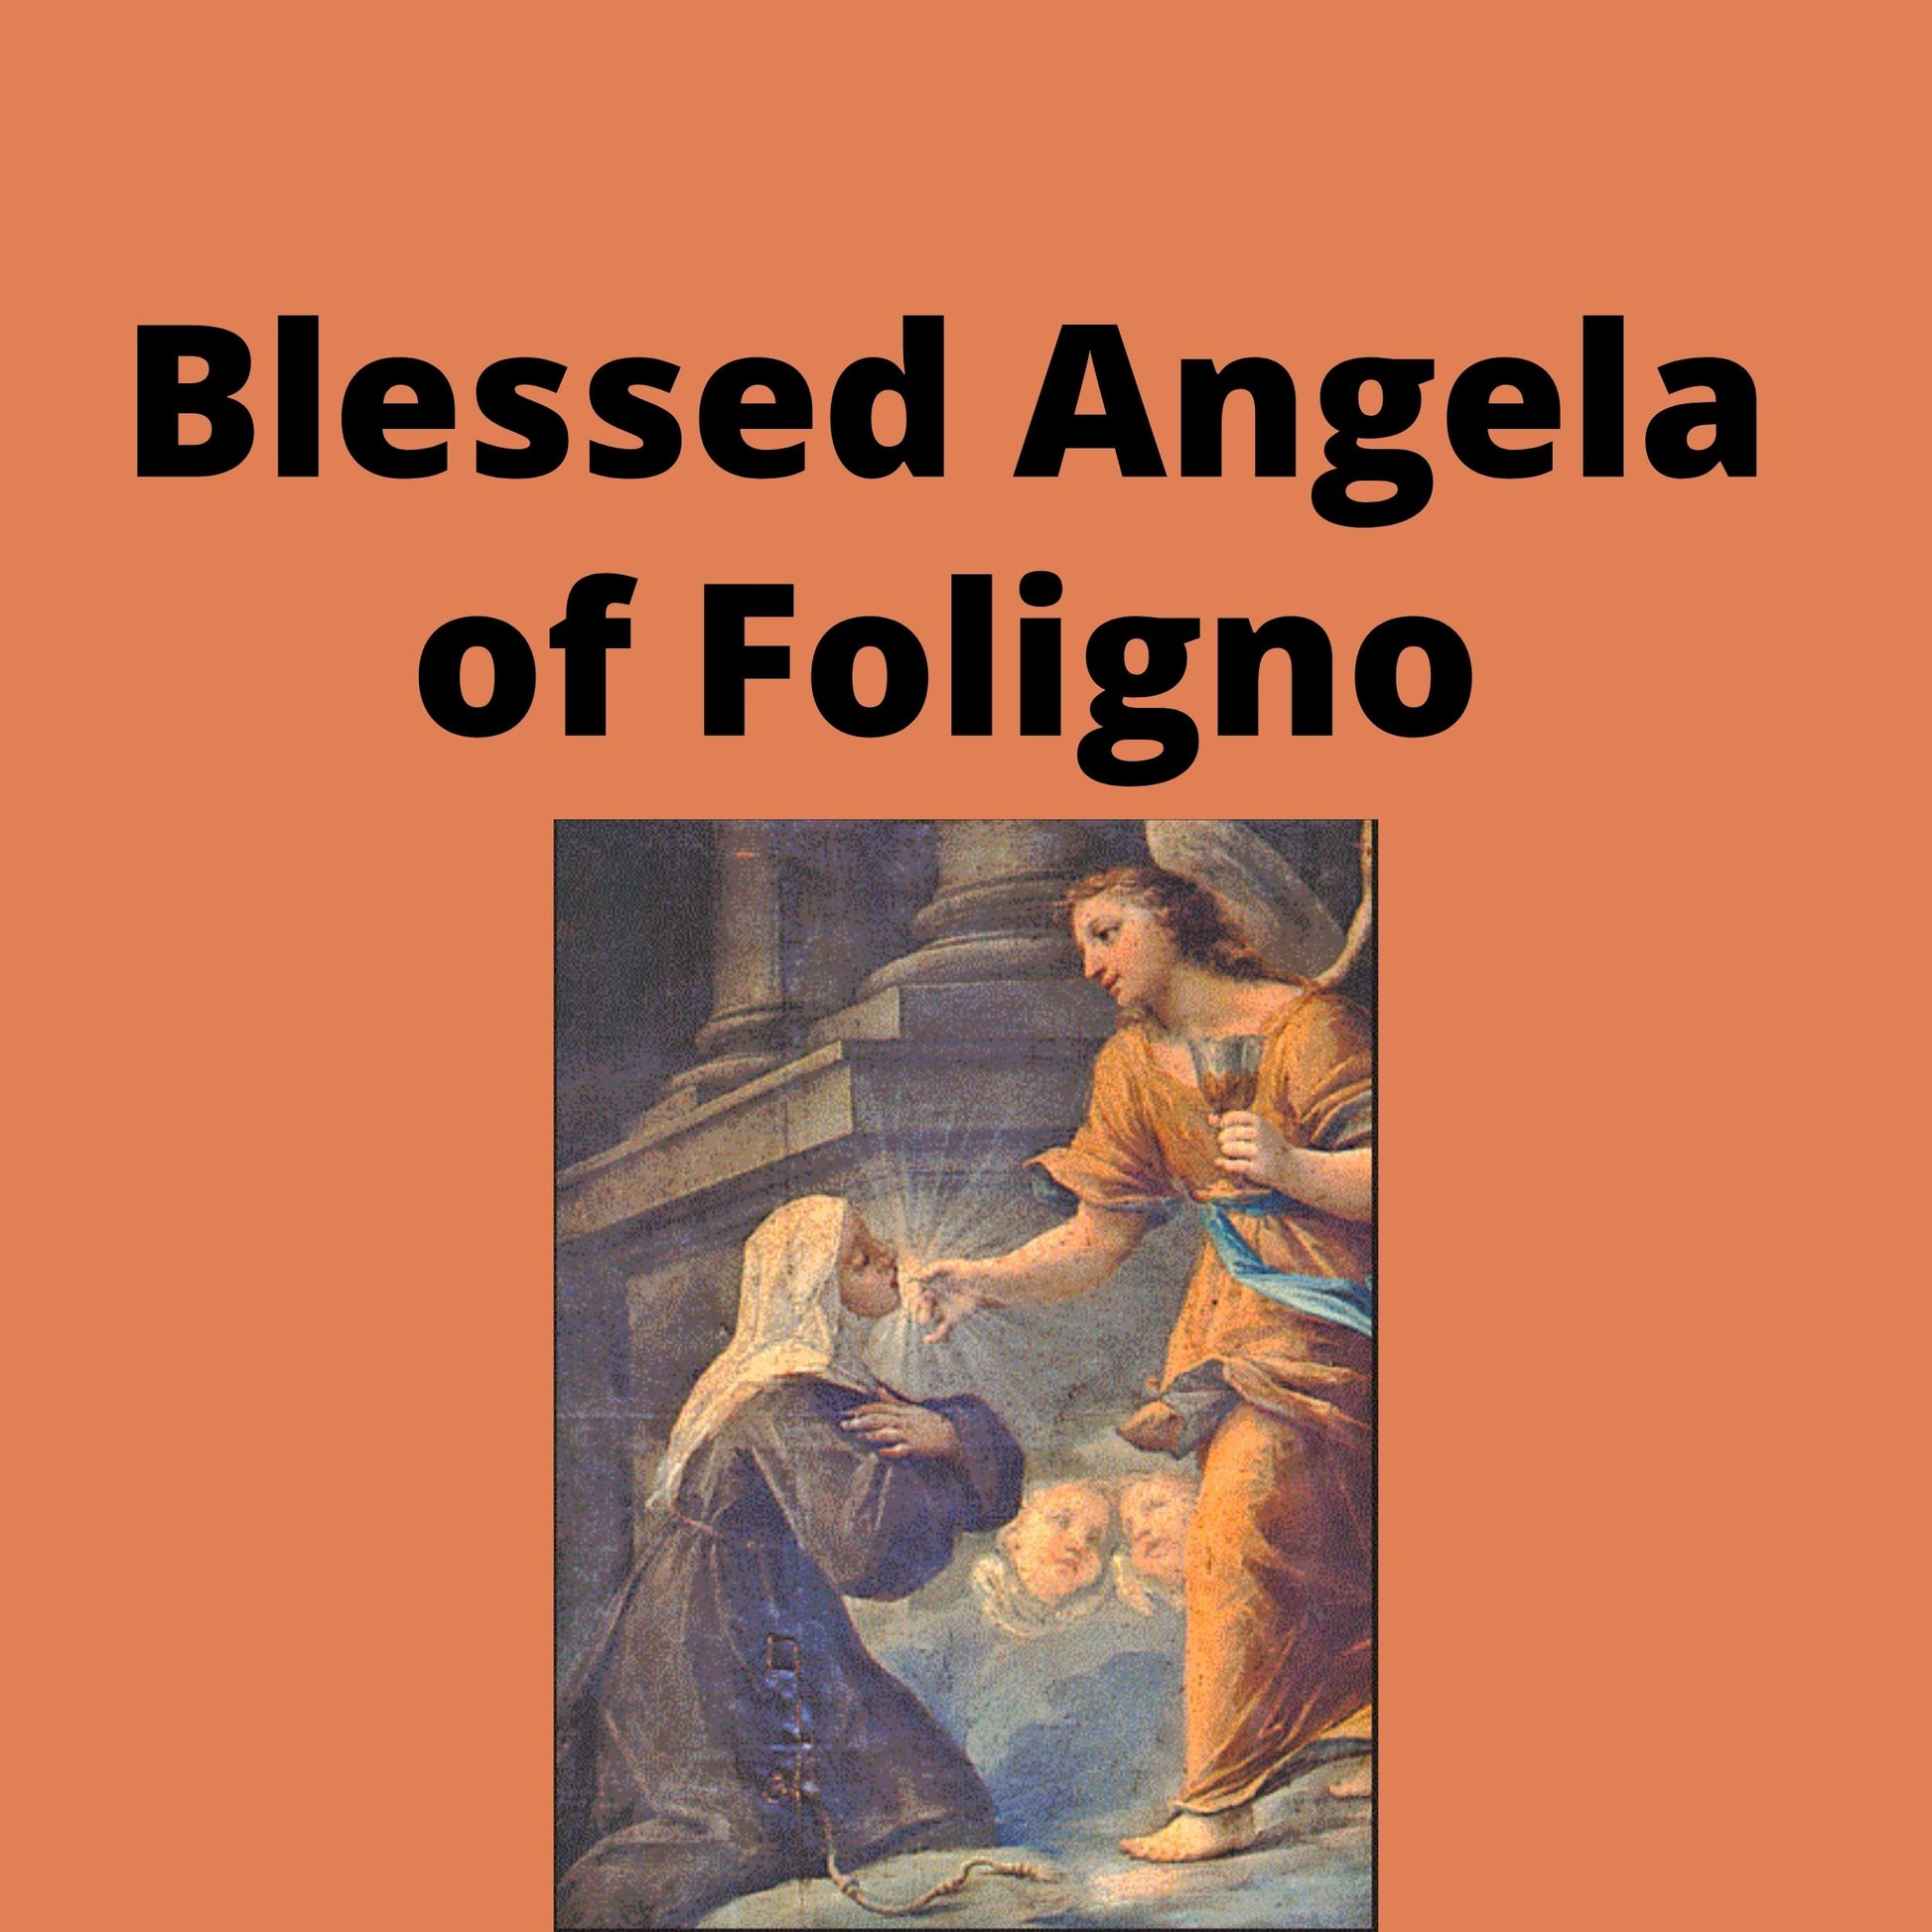 Blessed Angela of Foligno Video Download MP4 - Bob and Penny Lord